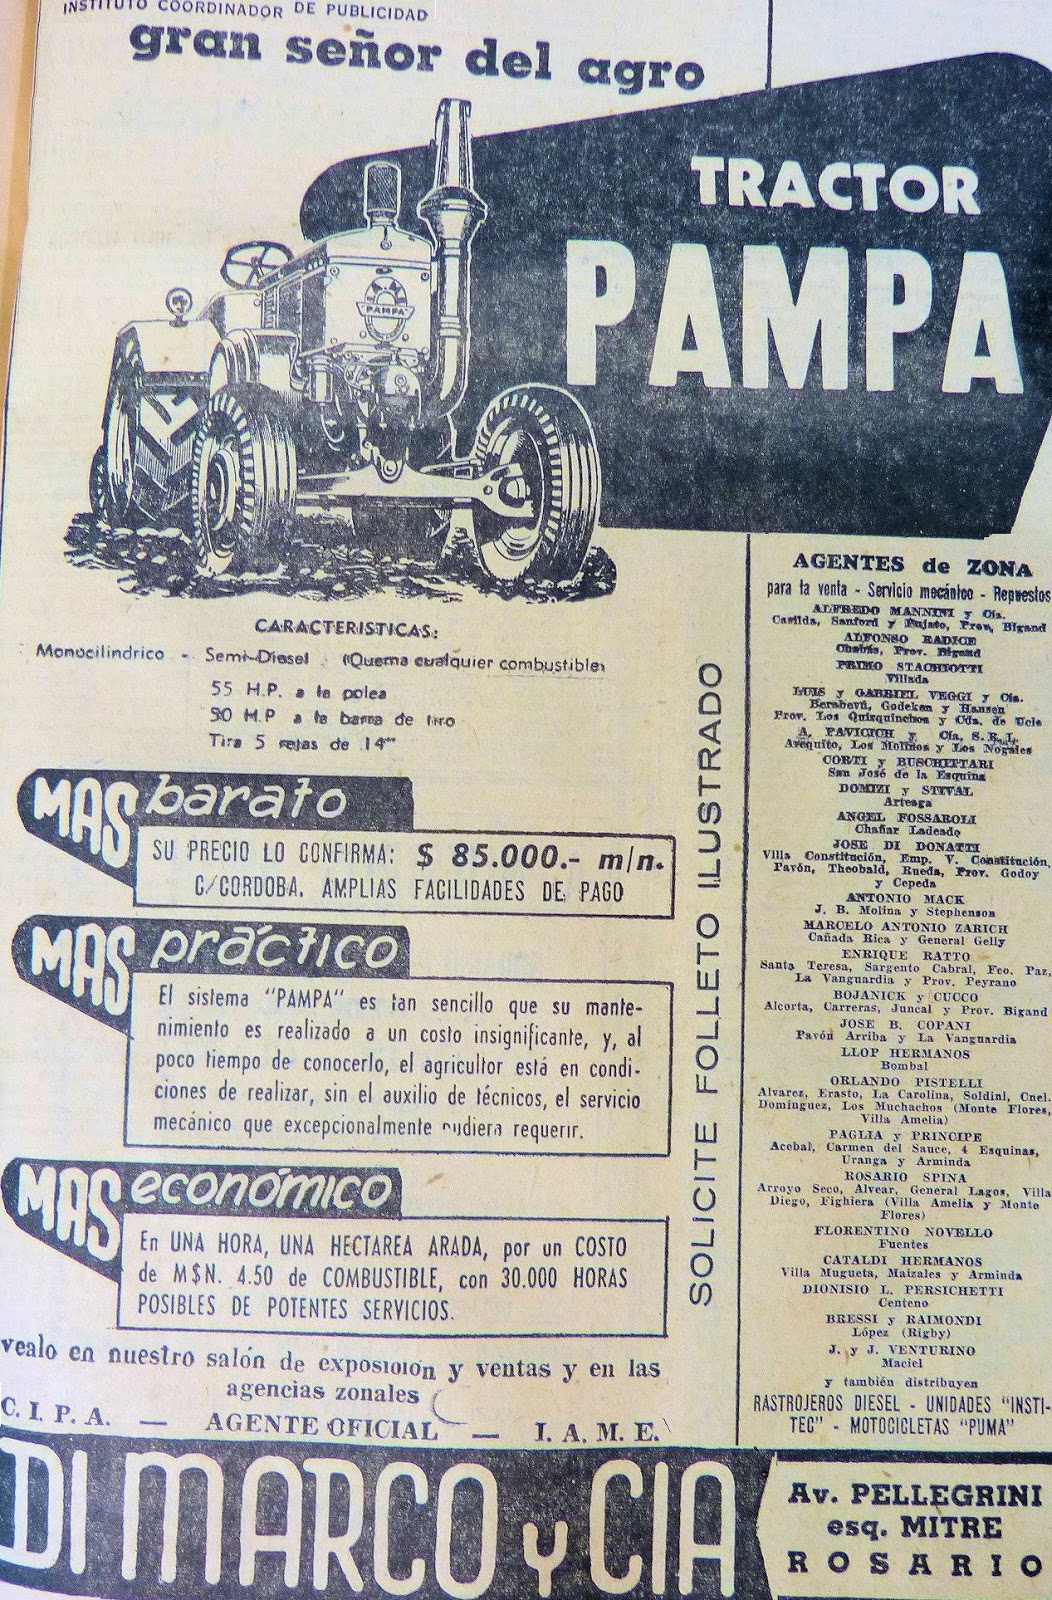 Tractor Pampa